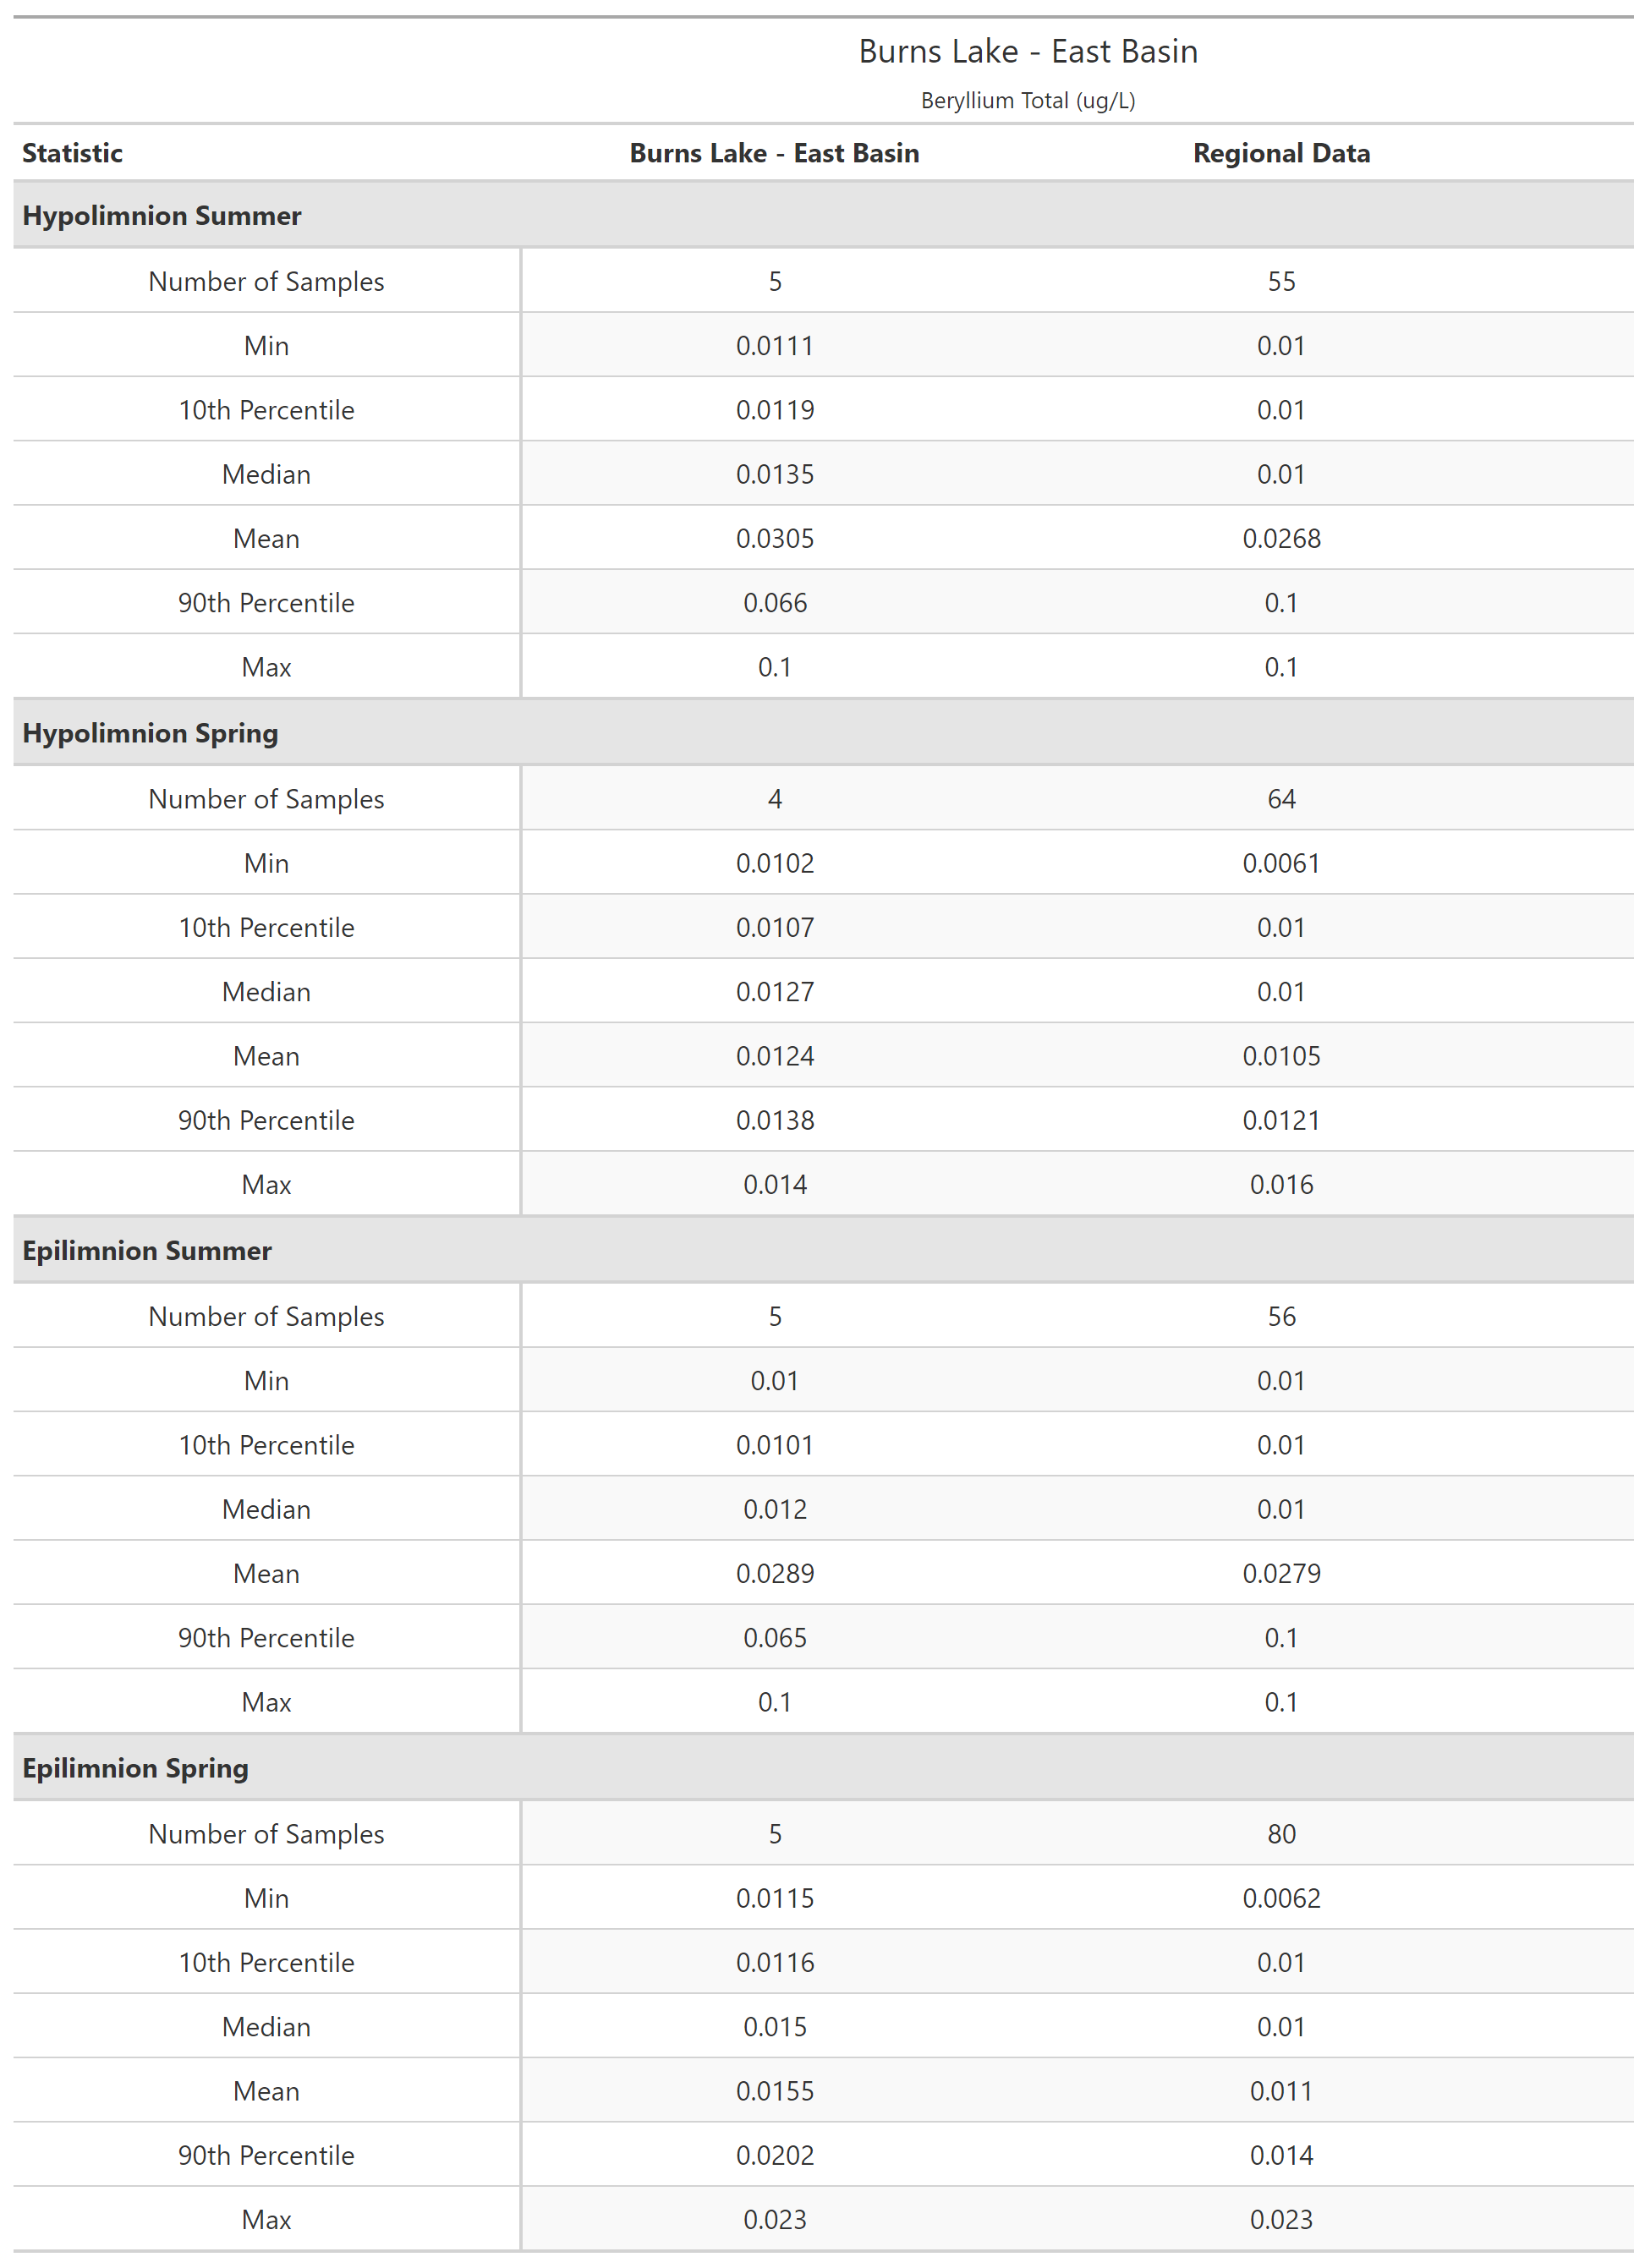 A table of summary statistics for Beryllium Total with comparison to regional data